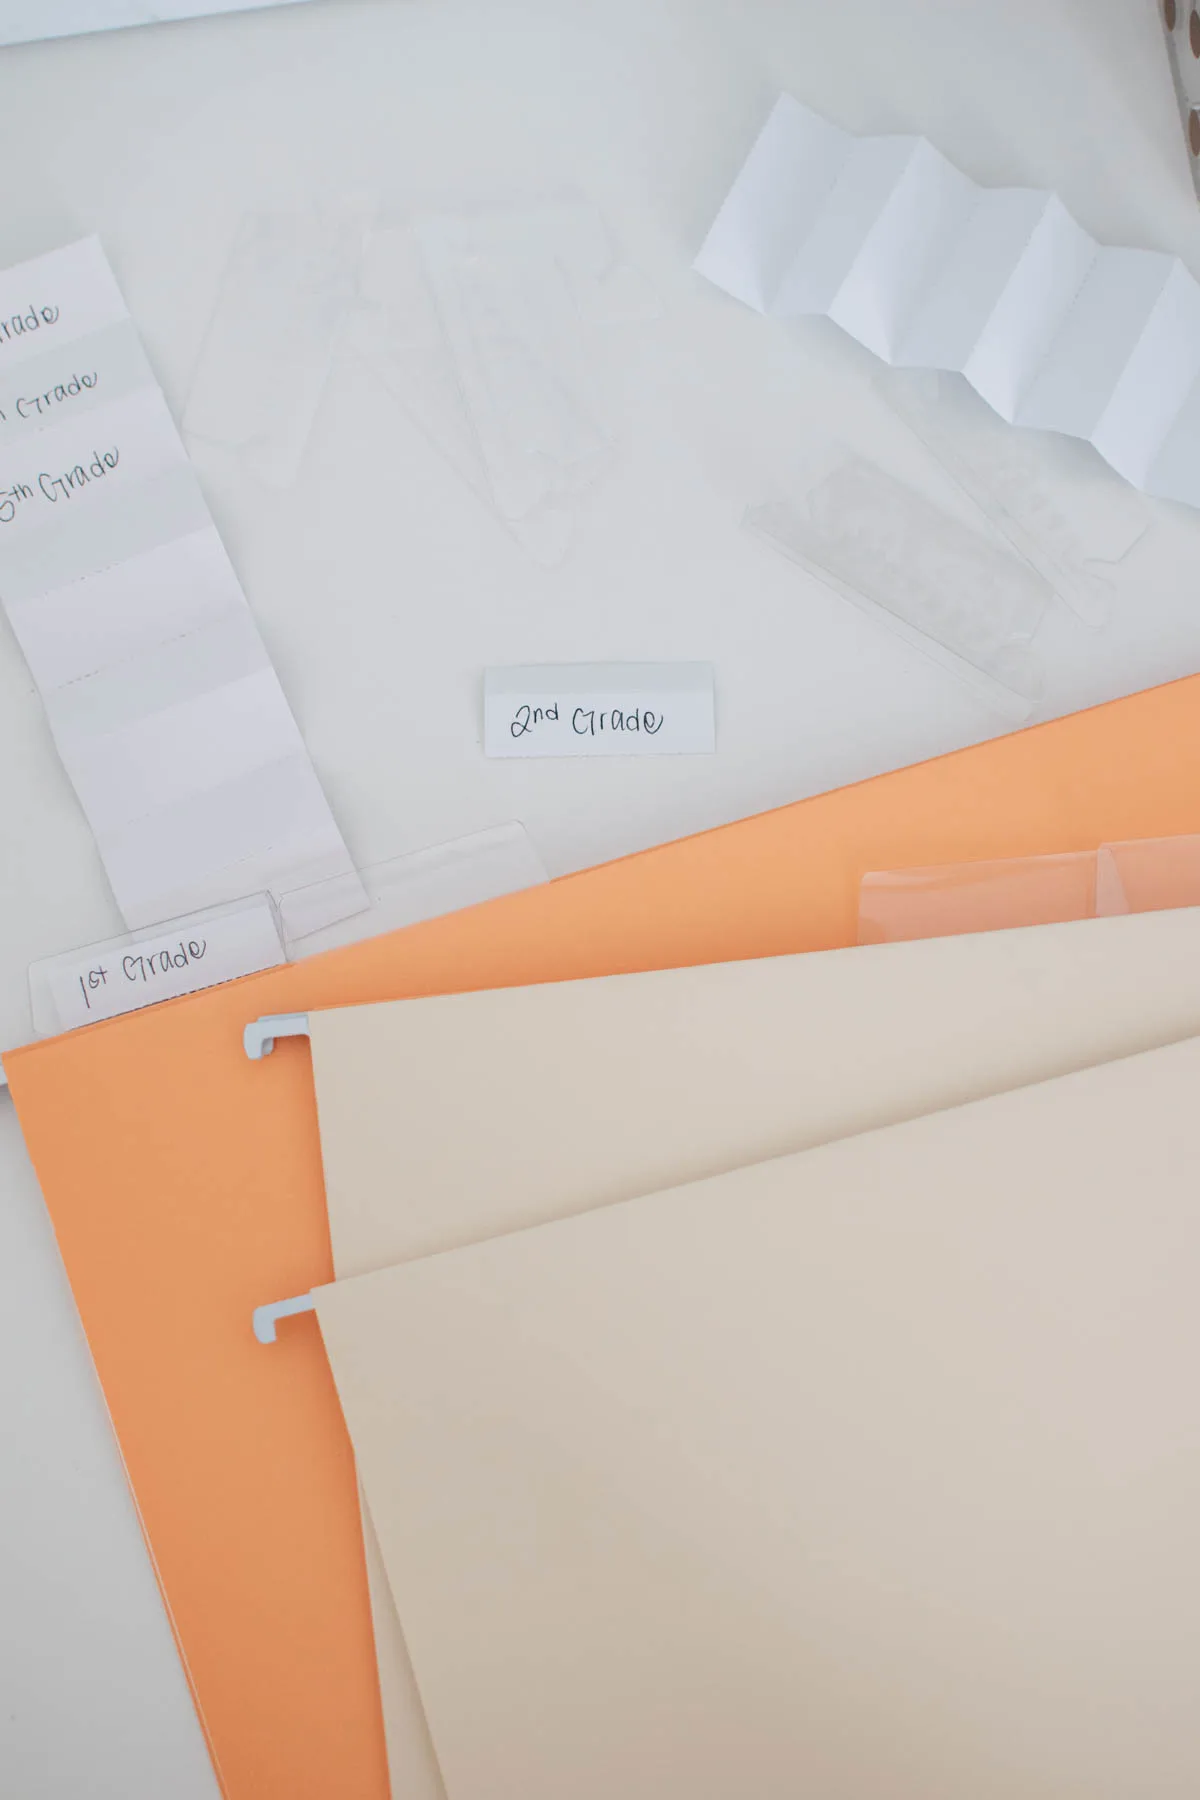 File folders, white labels, and plastic tabs on white desk.